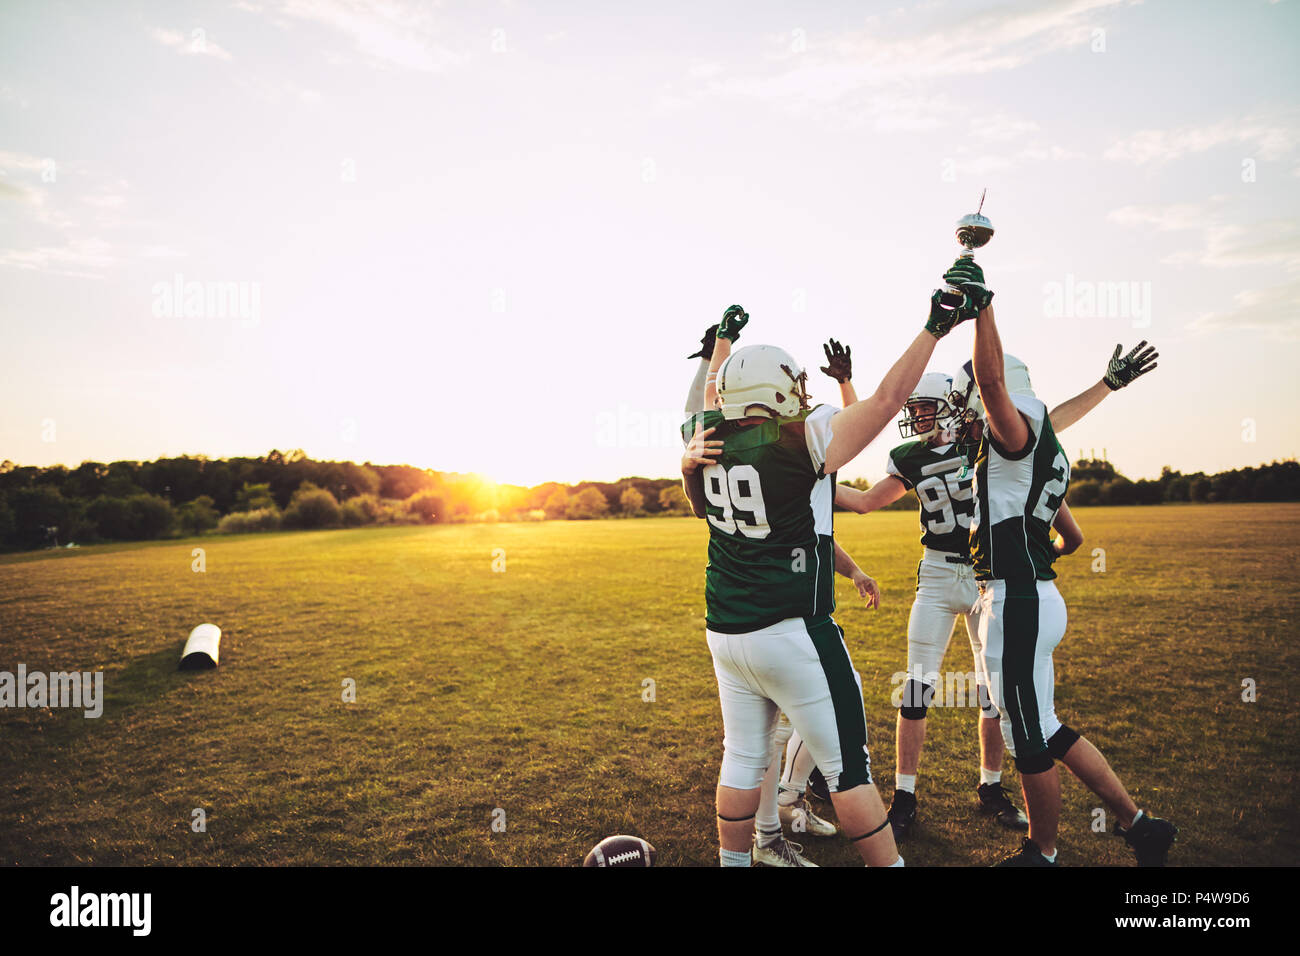 Excited group of American football players standing together in a huddle and raising a championship trophy in celebration Stock Photo